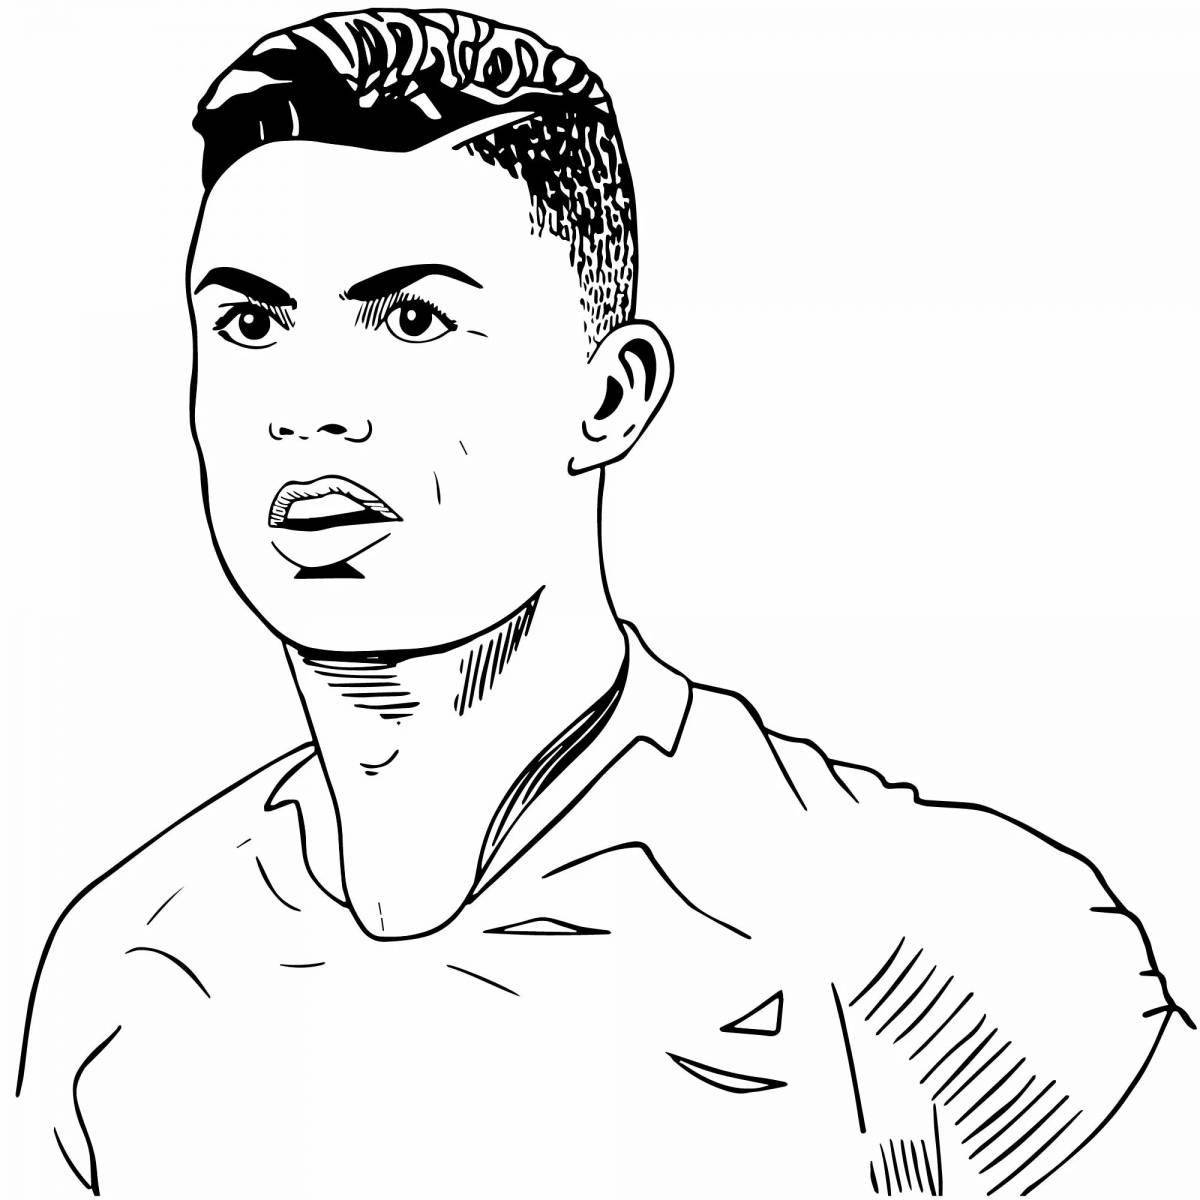 Coloring page soccer player ronaldo